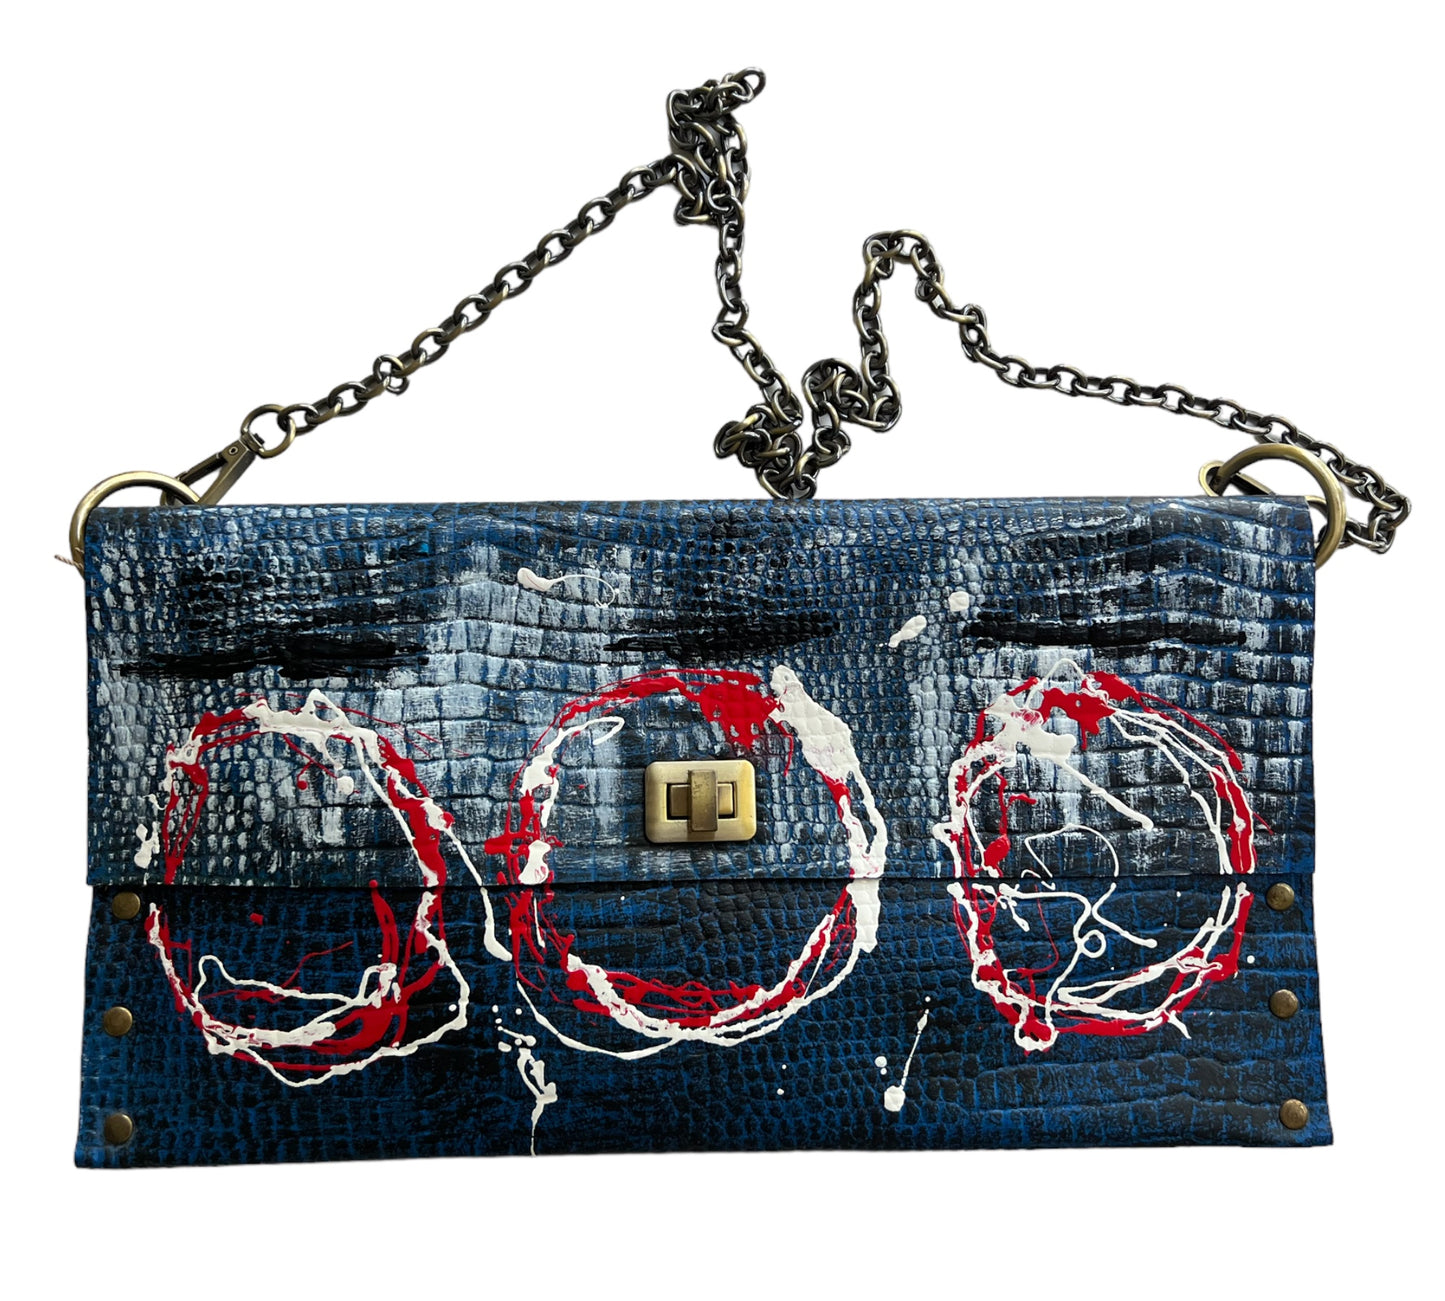 Blue Leather Envelope Clutch Hand Crafted Hand-Painted